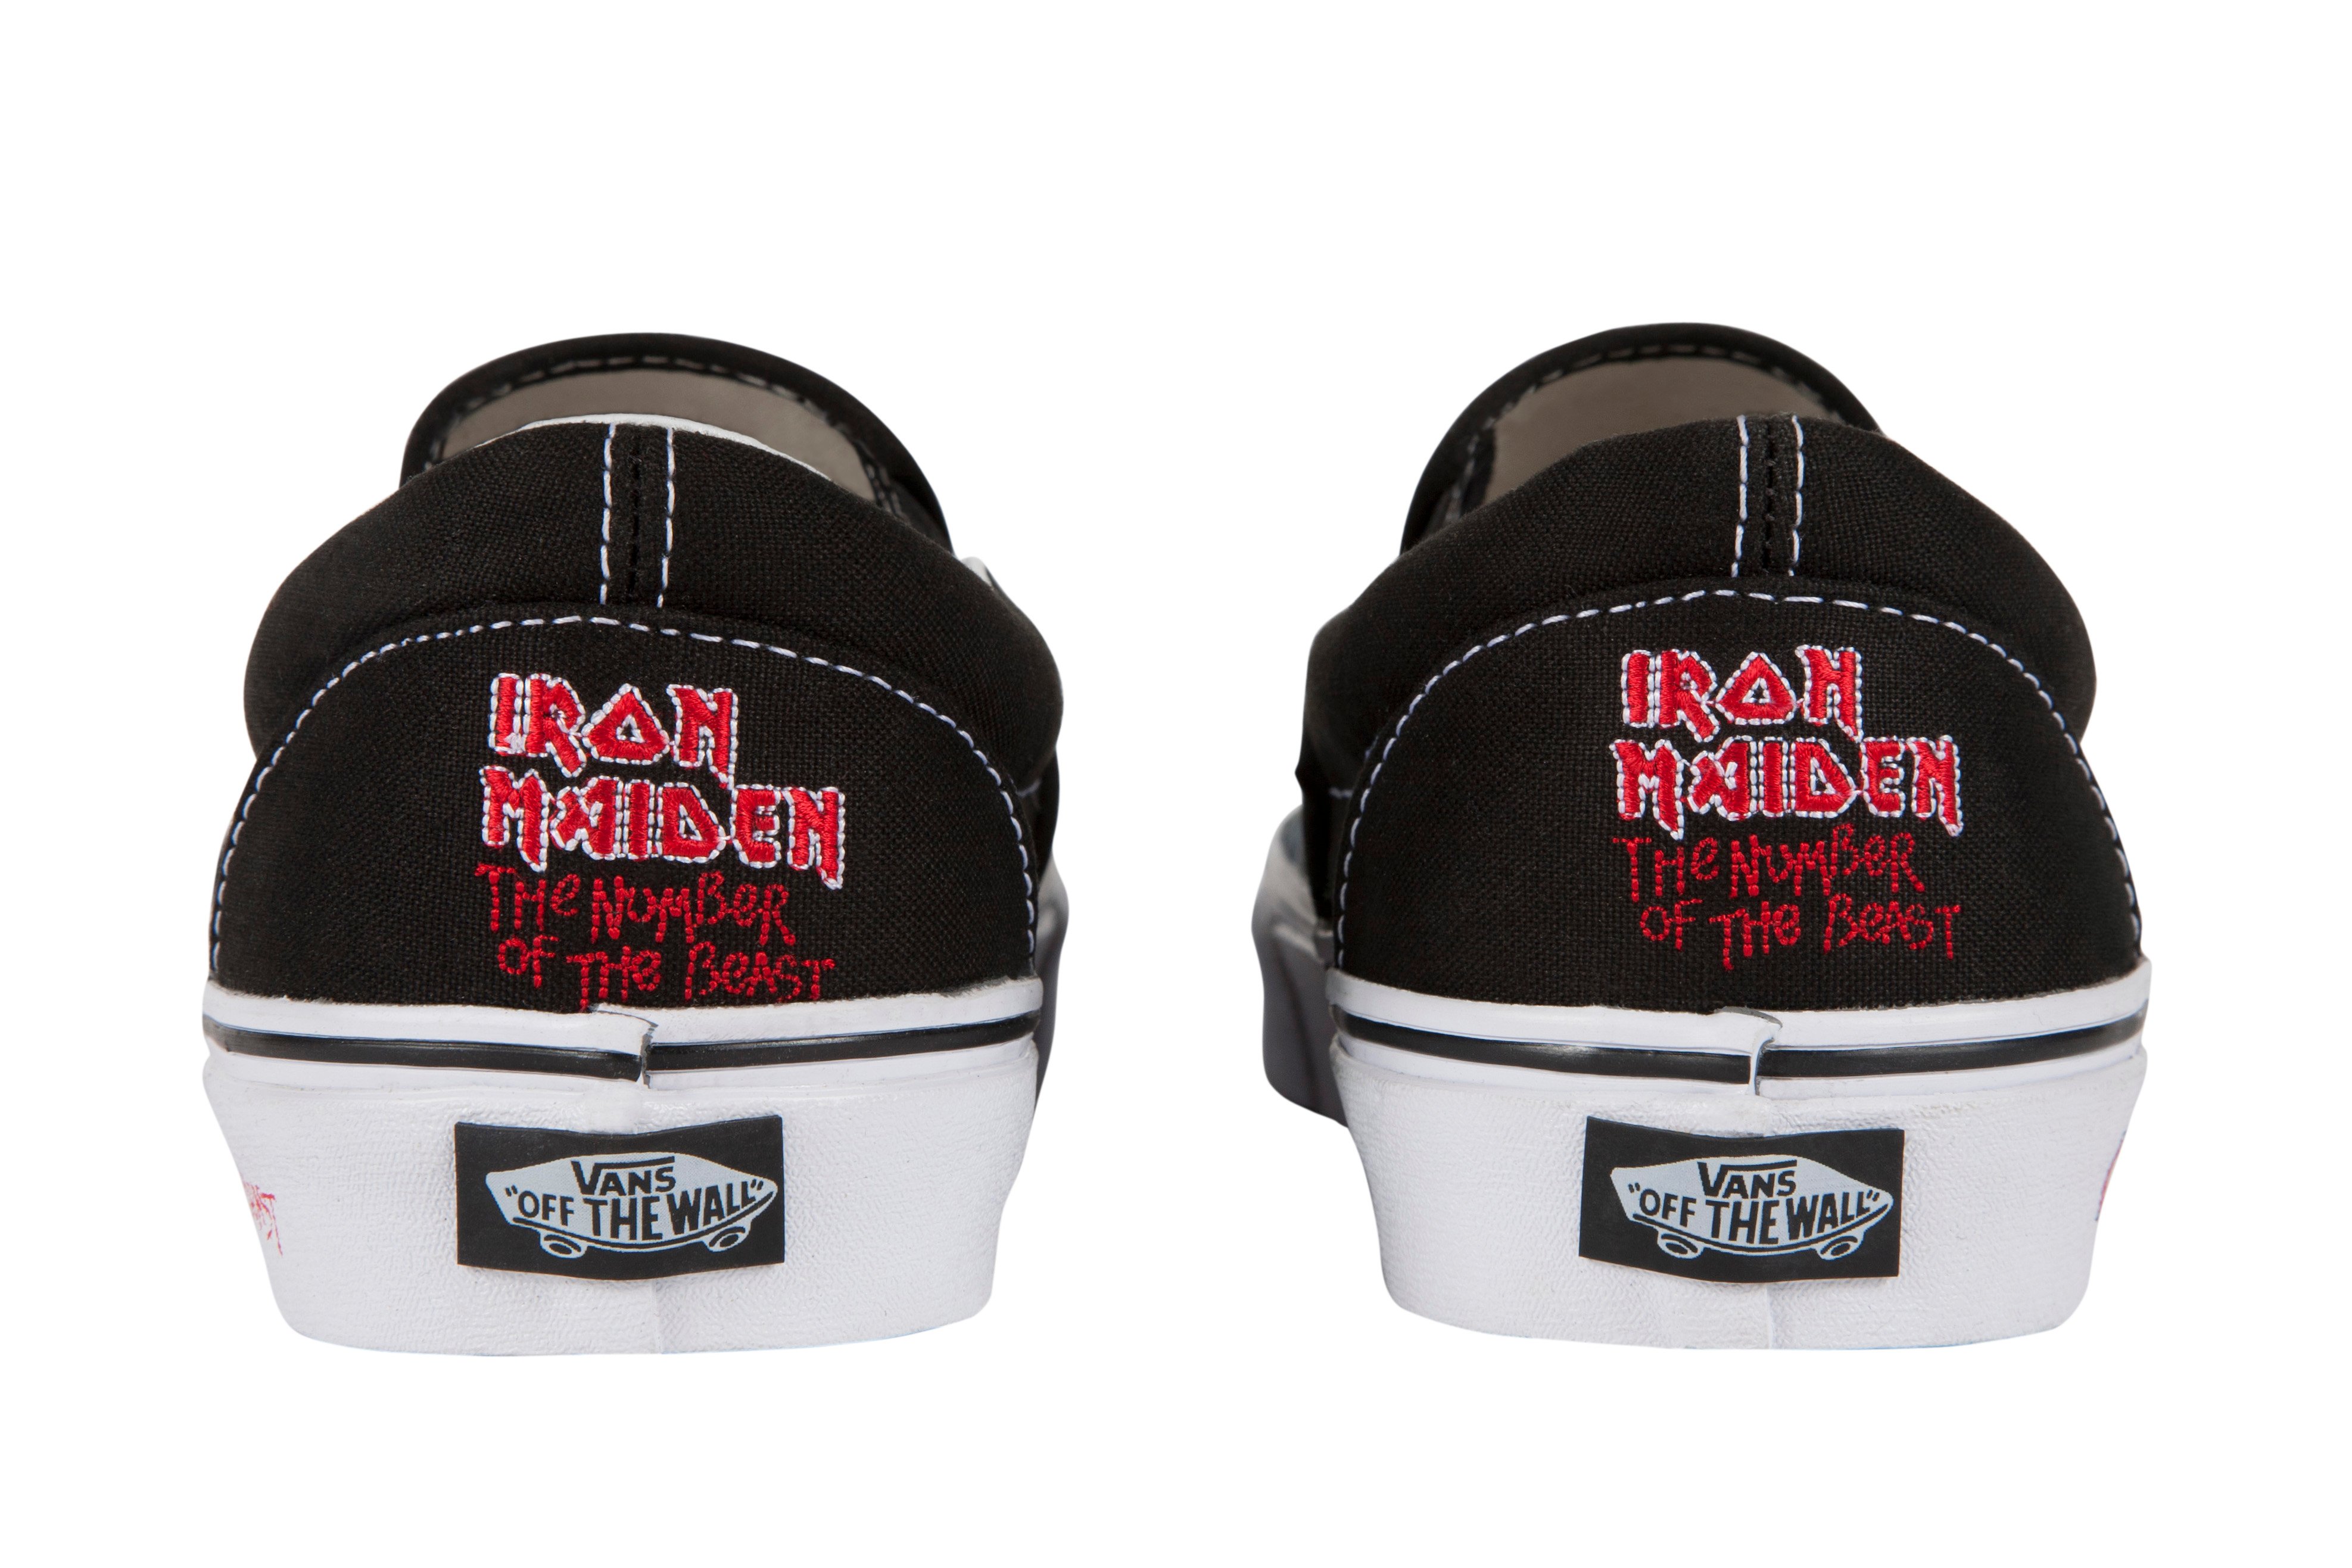 Iron Maiden x Vans 'The Number of the Beast' Collection